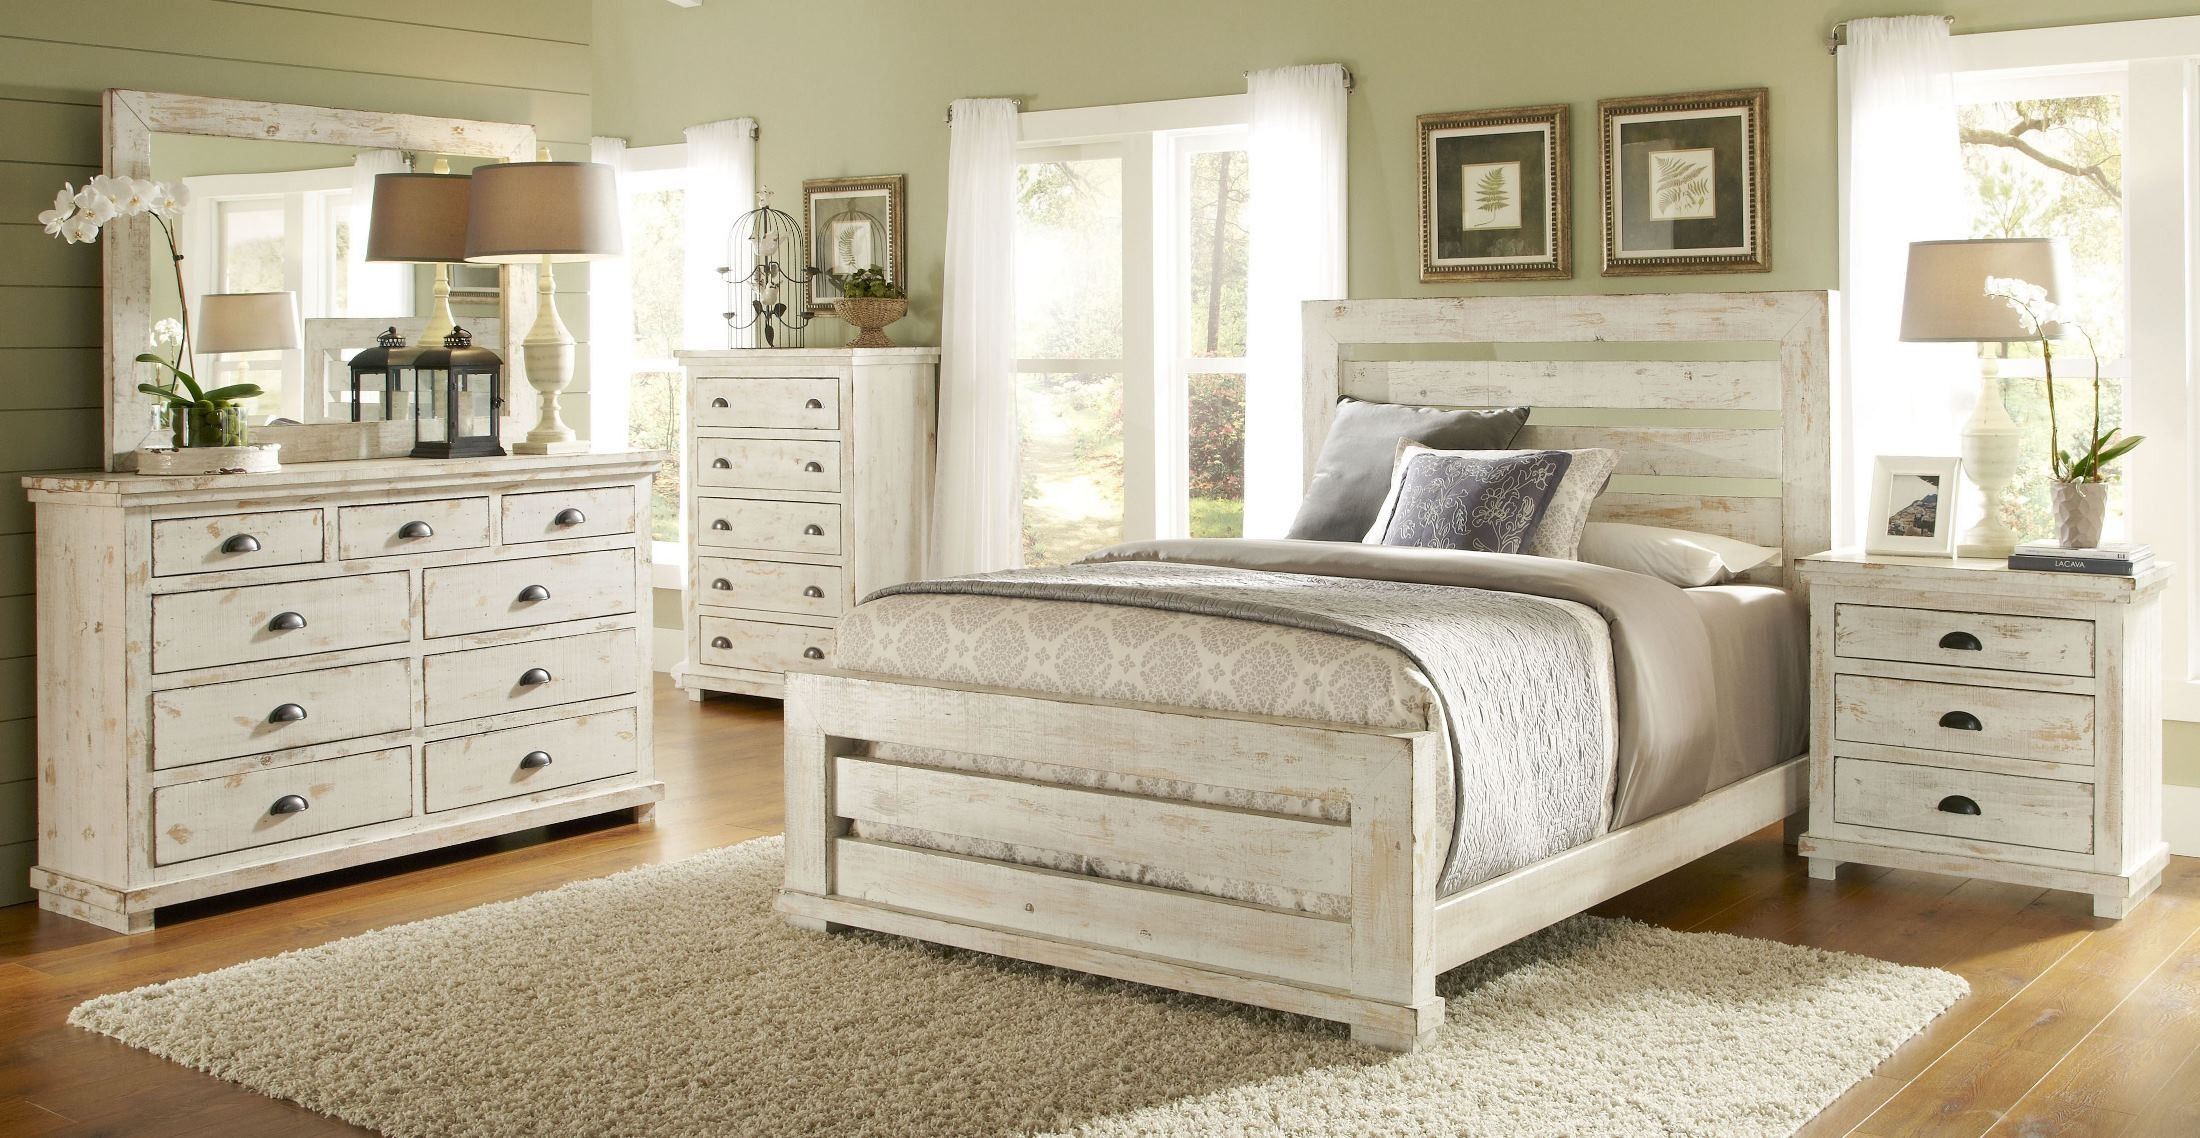 Willow Distressed White Slat Bedroom Set Home Distressed White in size 2200 X 1138